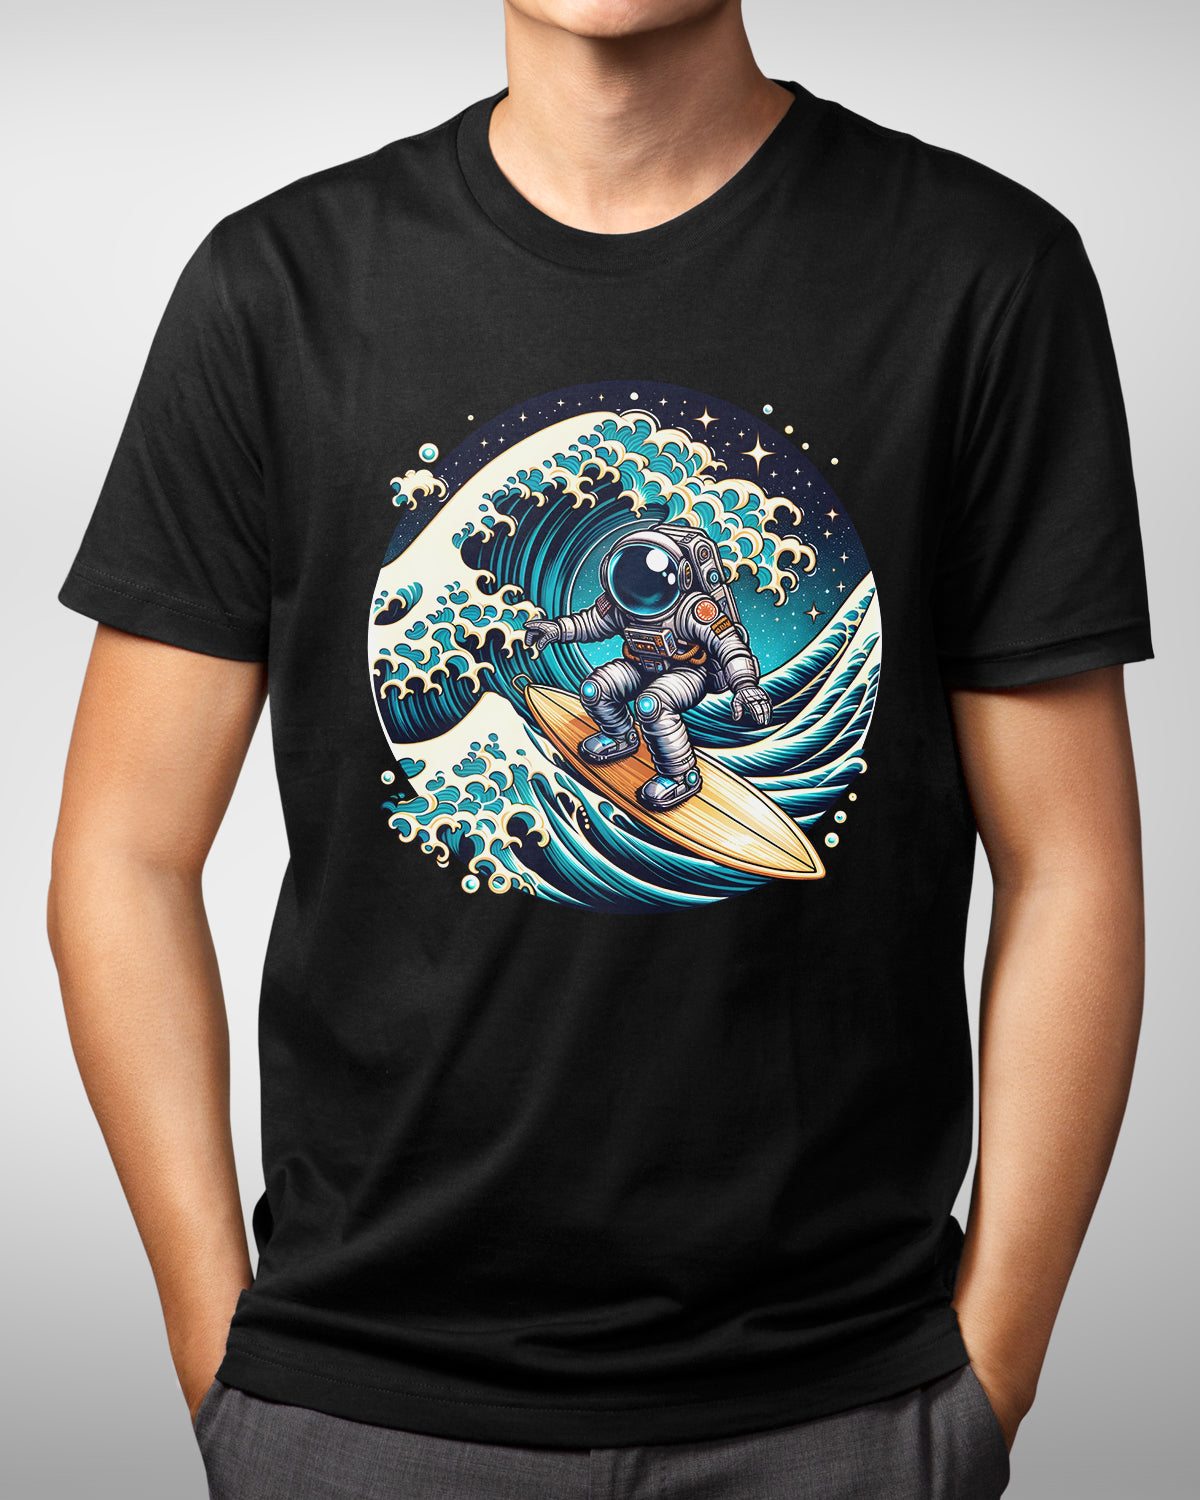 Space Astronaut Surfing Shirt, The Great Wave Kanagawa Tee, Ukiyo-e Inspired Outer Space Surfer Top, Funny Science Geek Gift